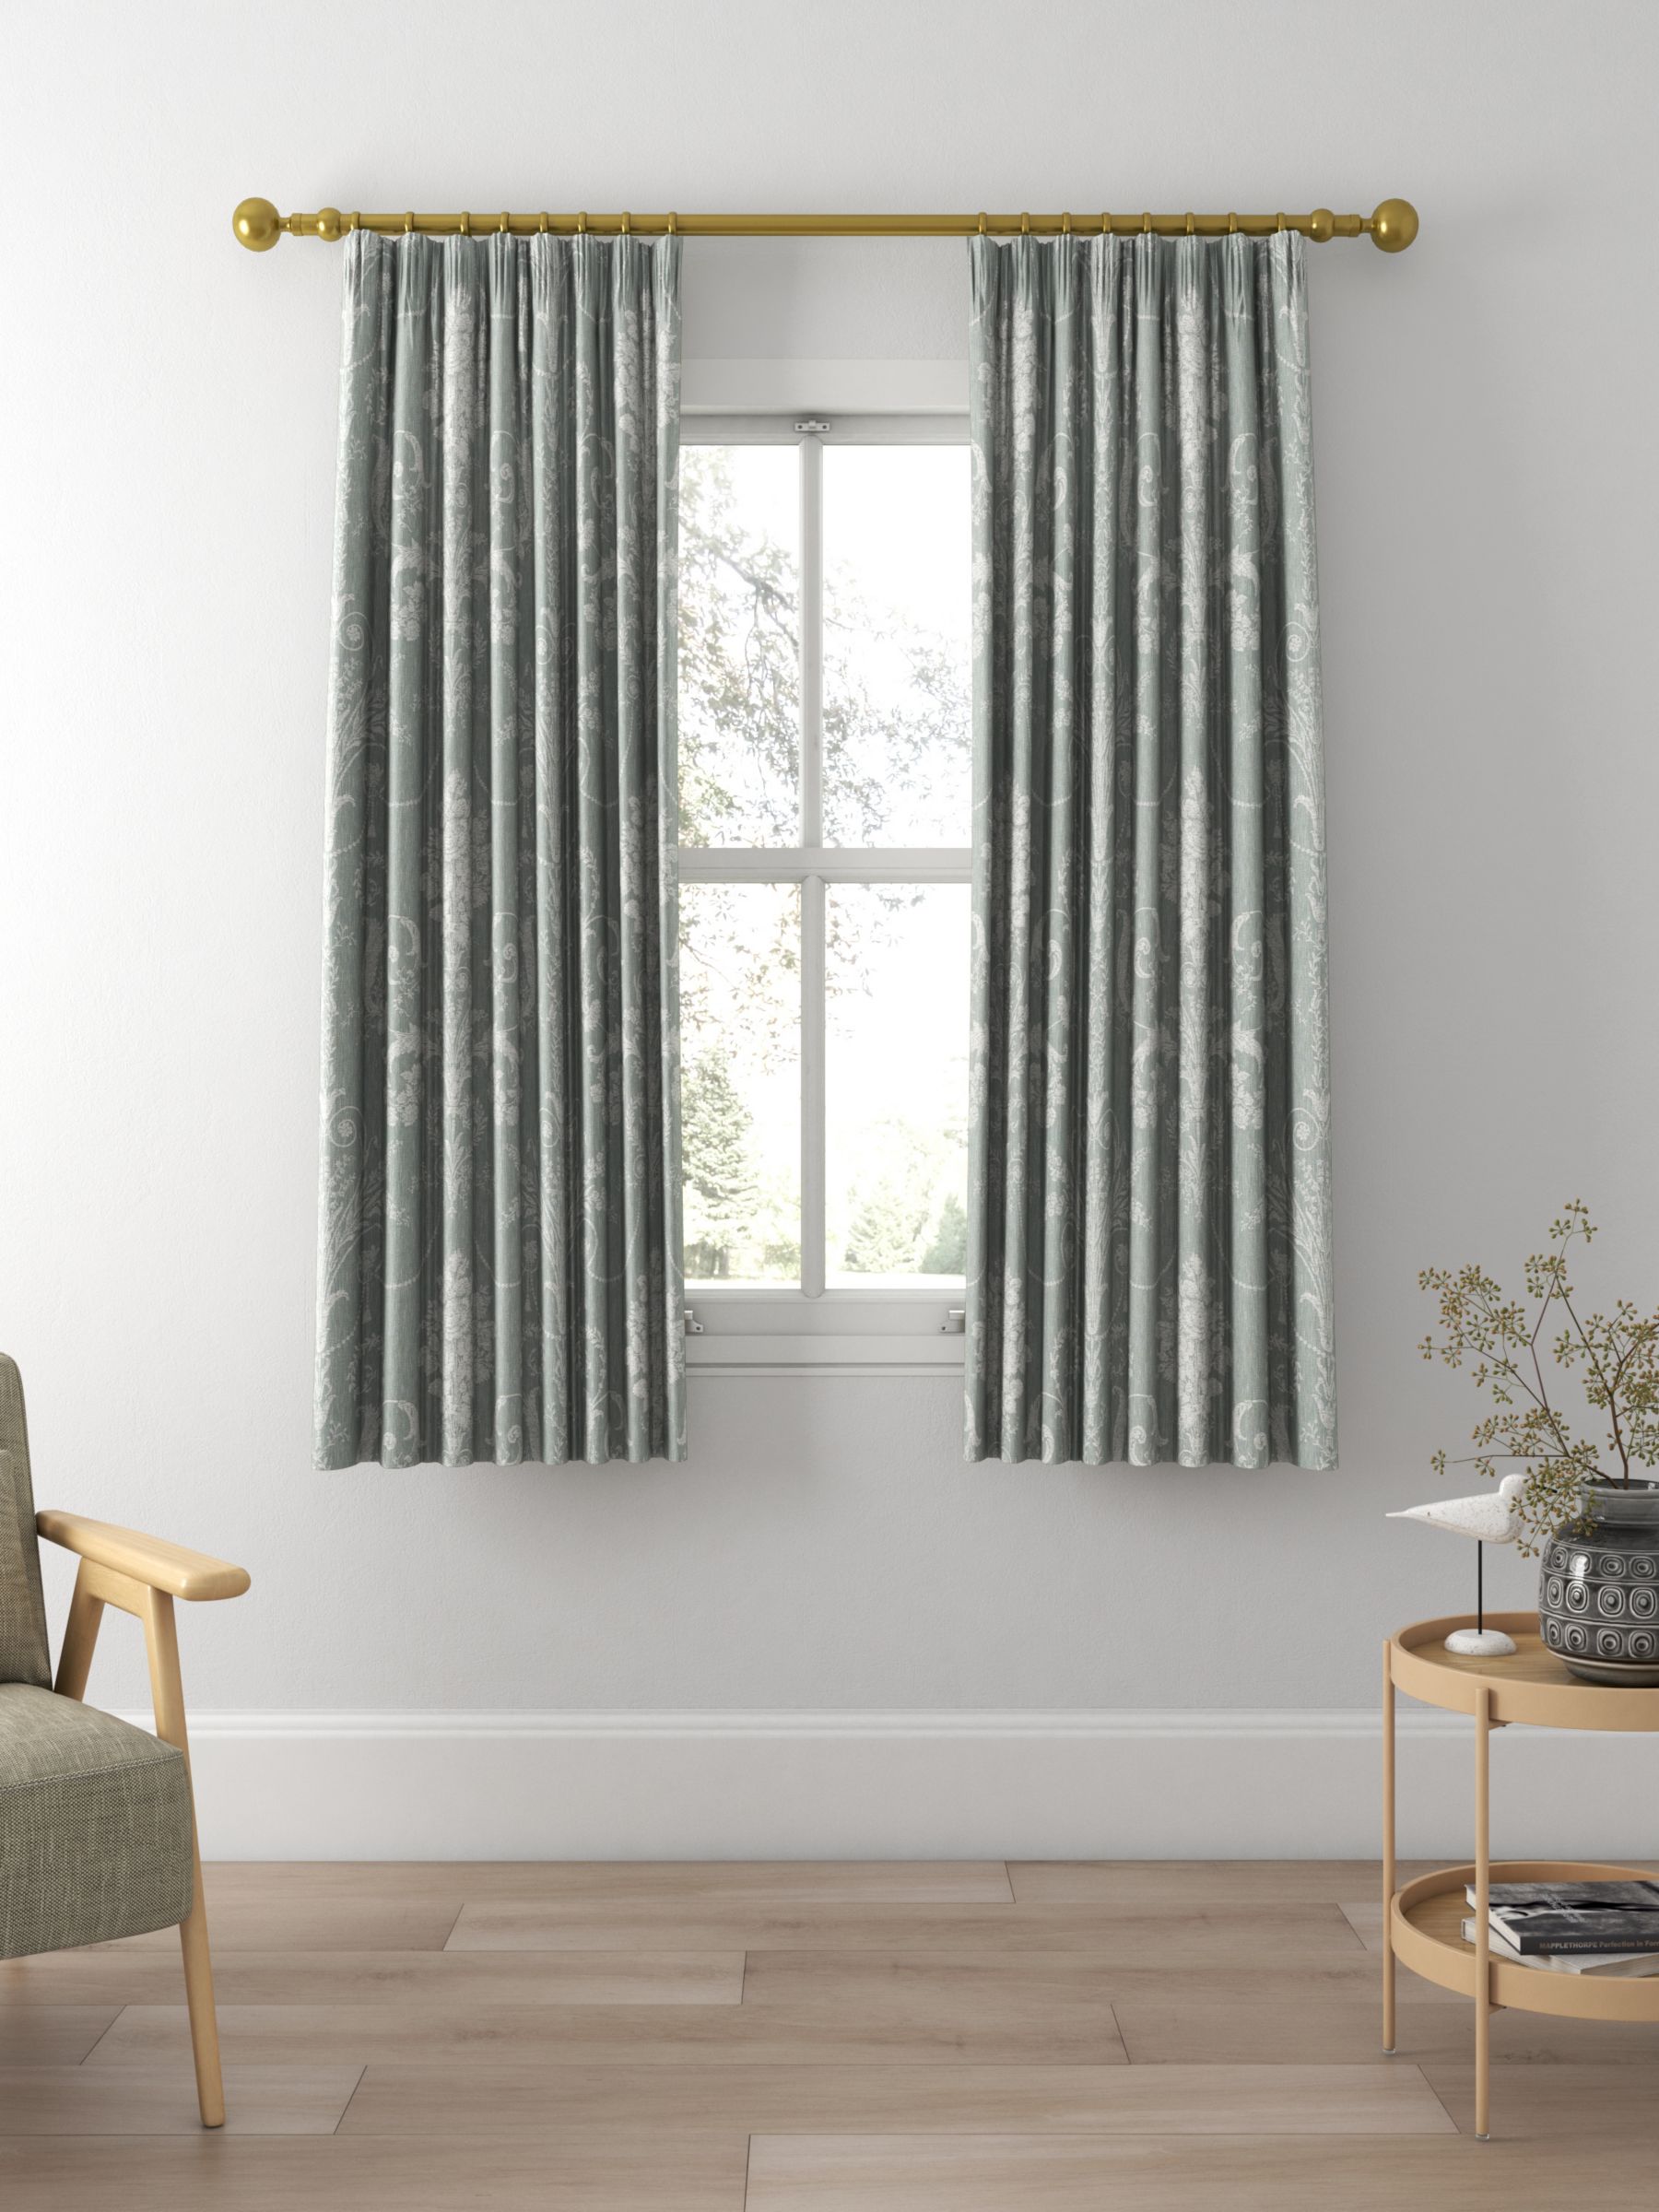 Laura Ashley Josette Woven Made to Measure Curtains, Grey Green